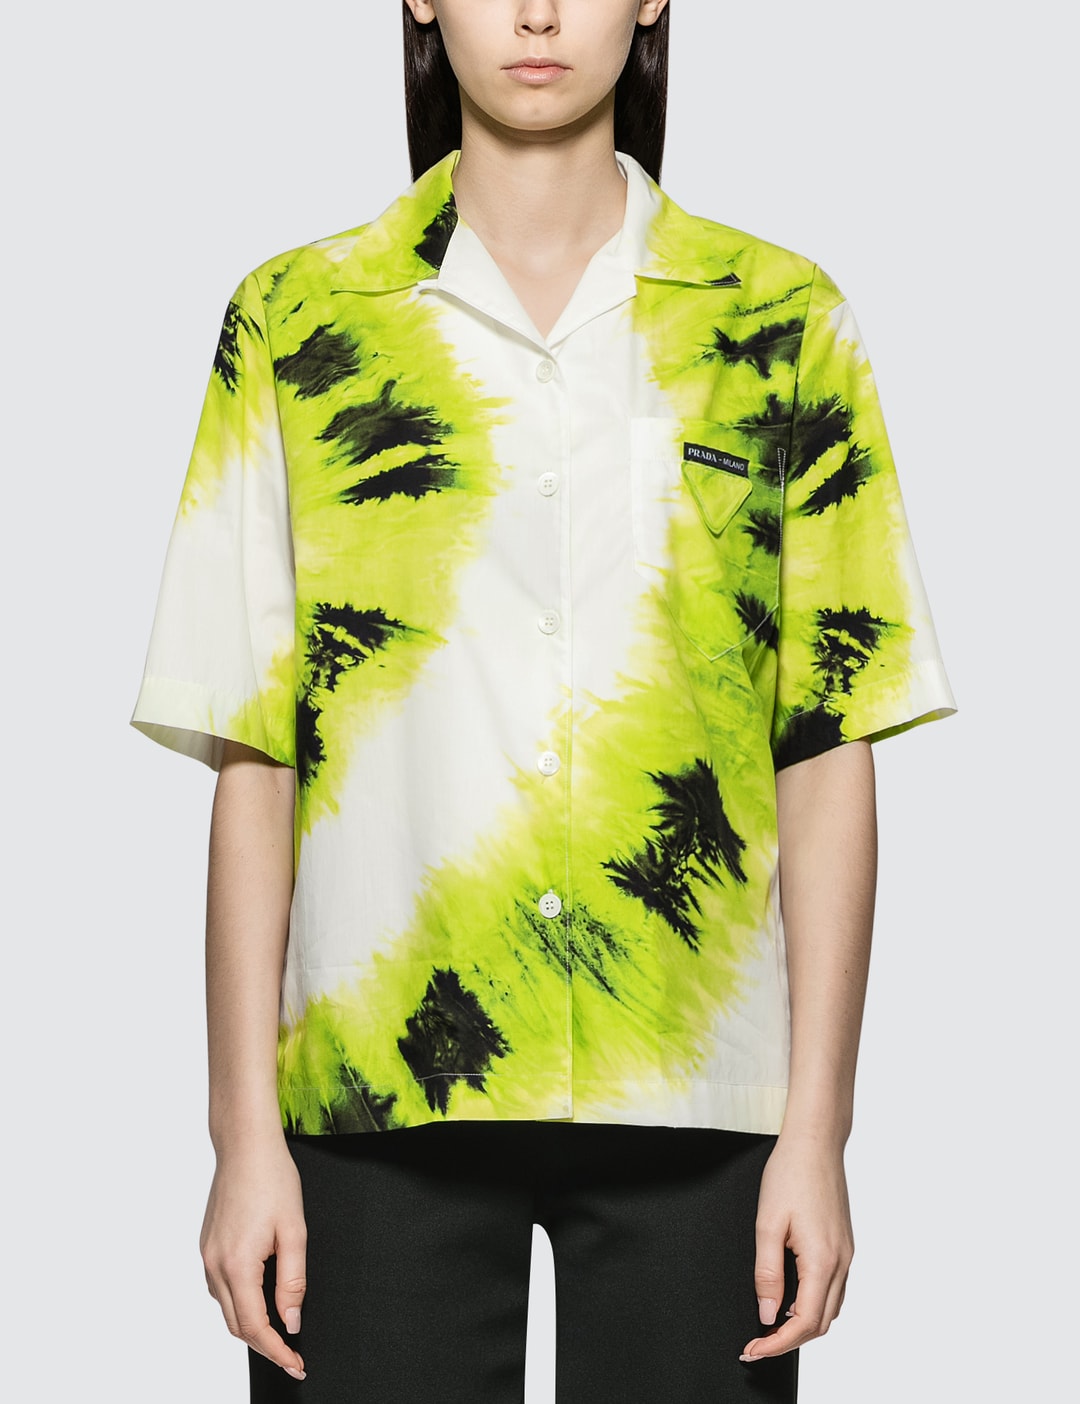 Prada - Tie Dye Print Shirt in Lime | HBX - Globally Curated Fashion and  Lifestyle by Hypebeast